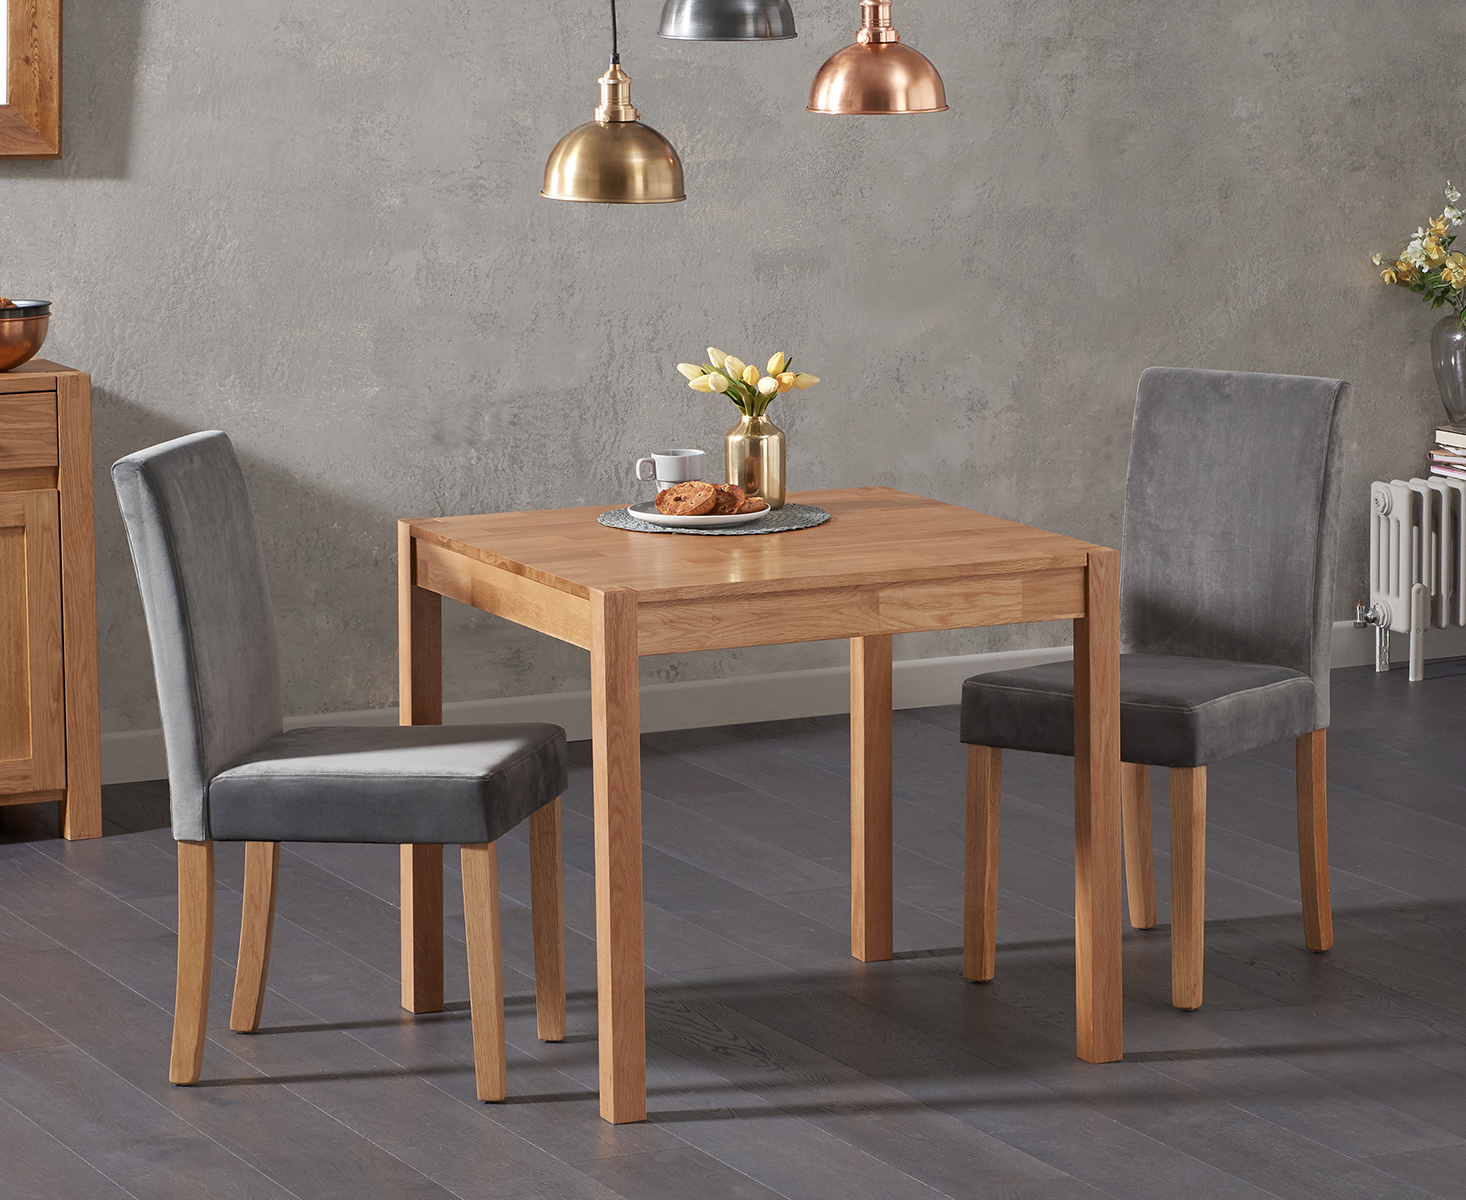 Photo 1 of York 80cm solid oak dining table with 4 grey lila chairs